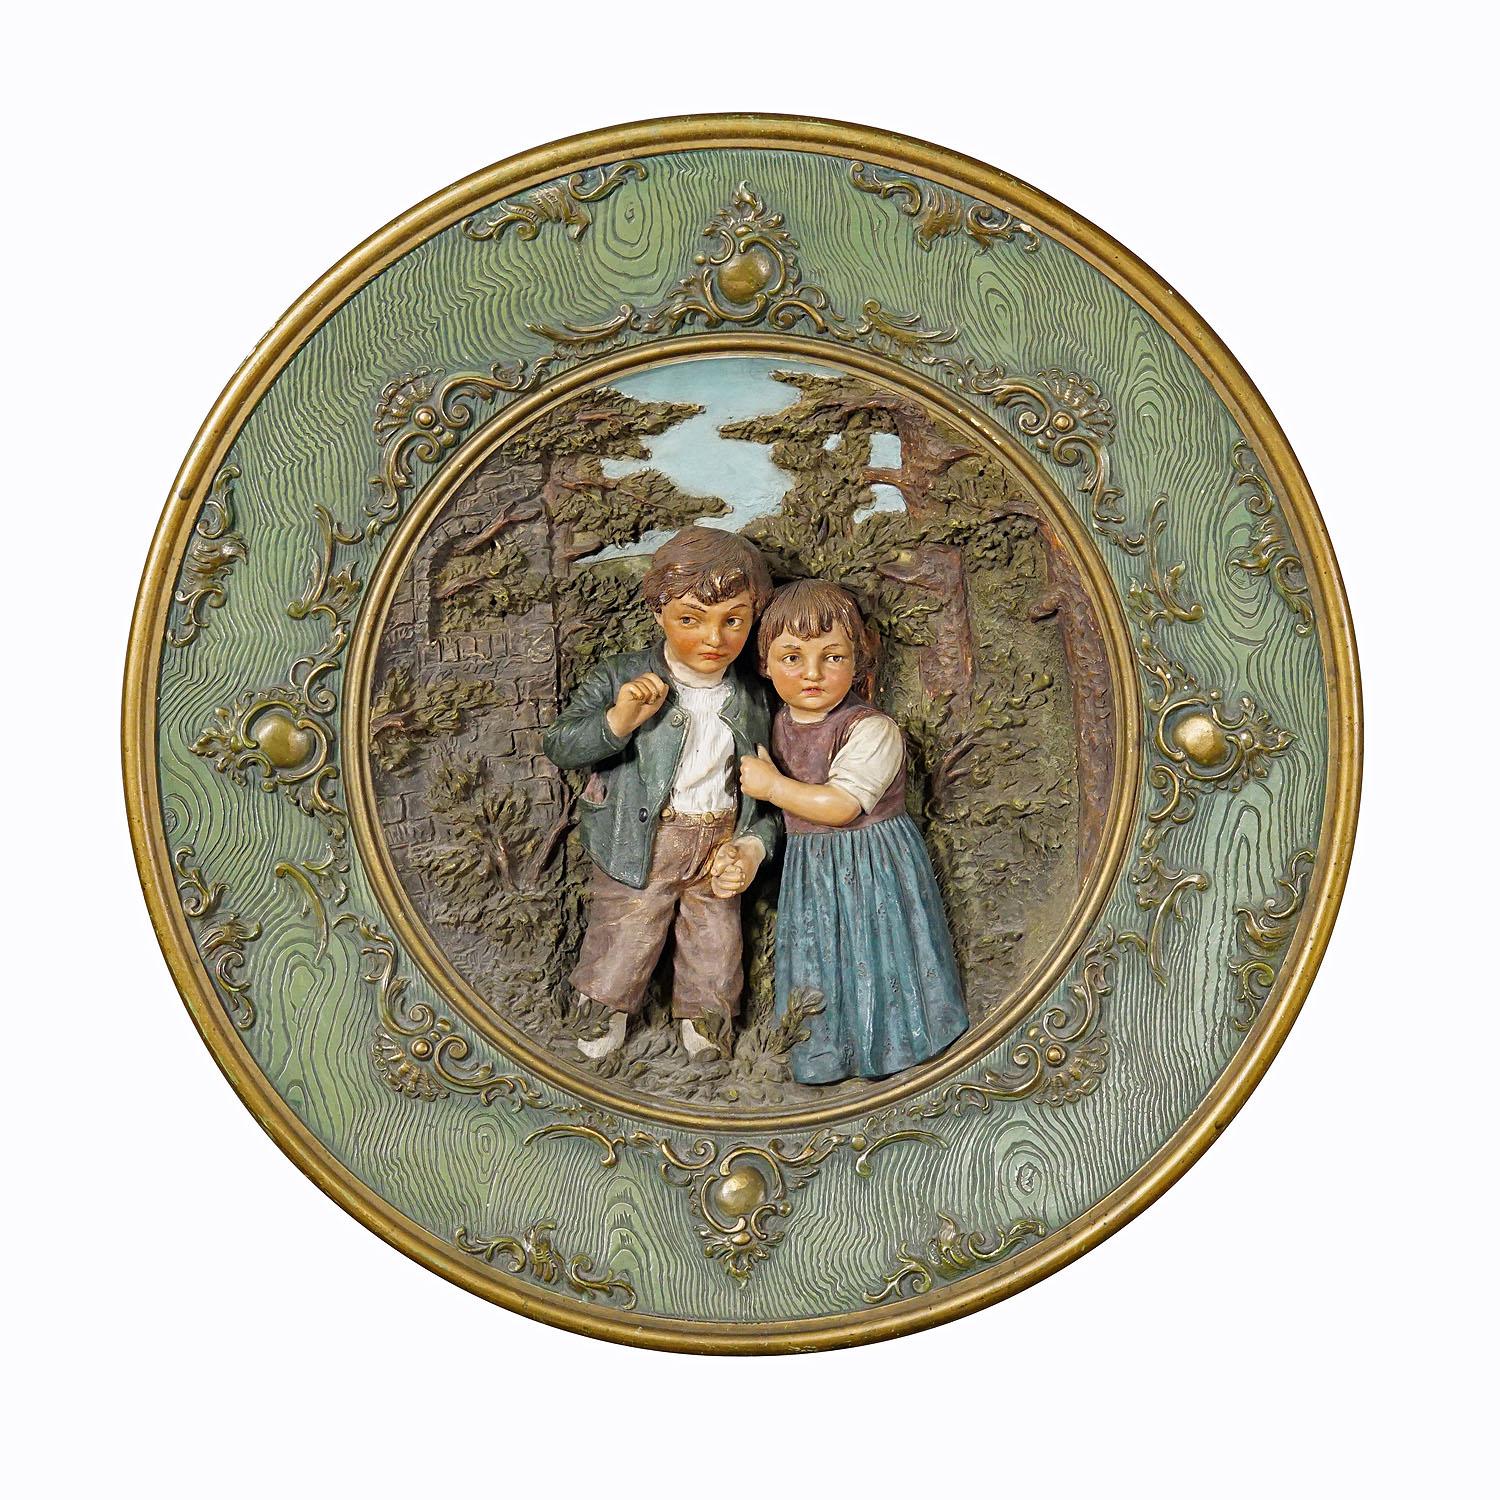 Terracotta Wall Plate with Whimsy Children in Farmer Costumes by Johann Maresch

A large terracotta wall plate depicting a relief couple of farmers childs in a forest enviroment. Manufactured by Johann Maresch, Aussig Austria in the late 19th